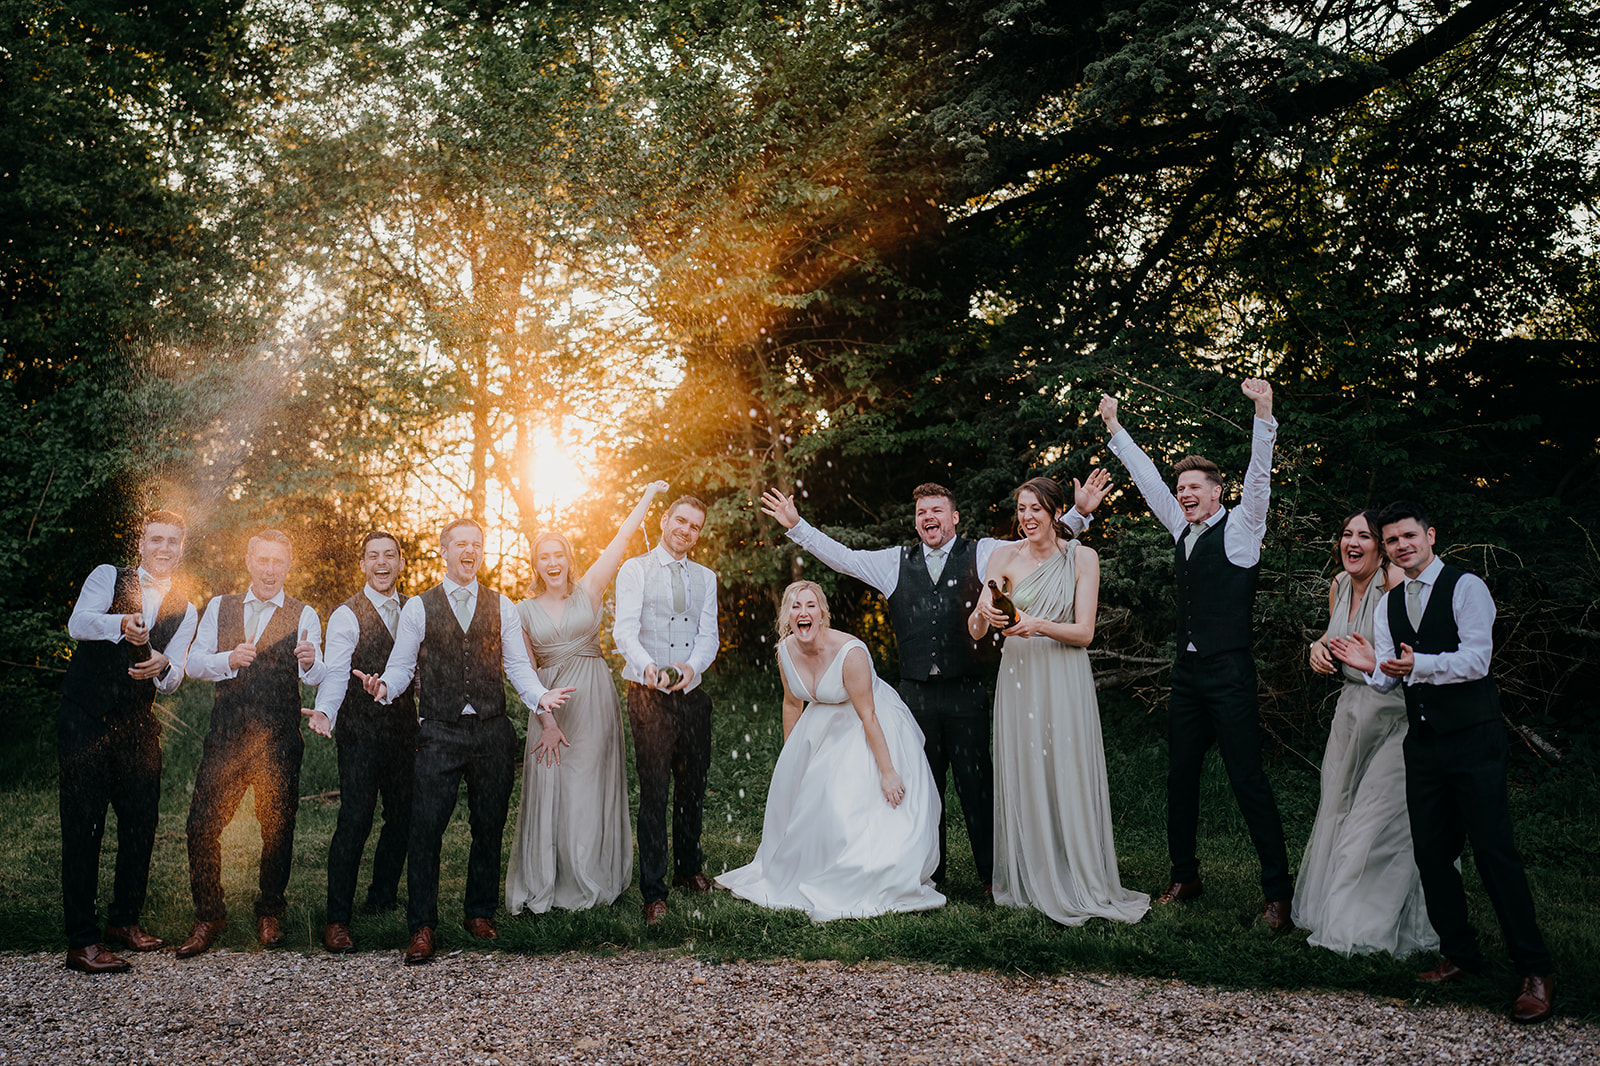 Bridal party champagne spray at sunset